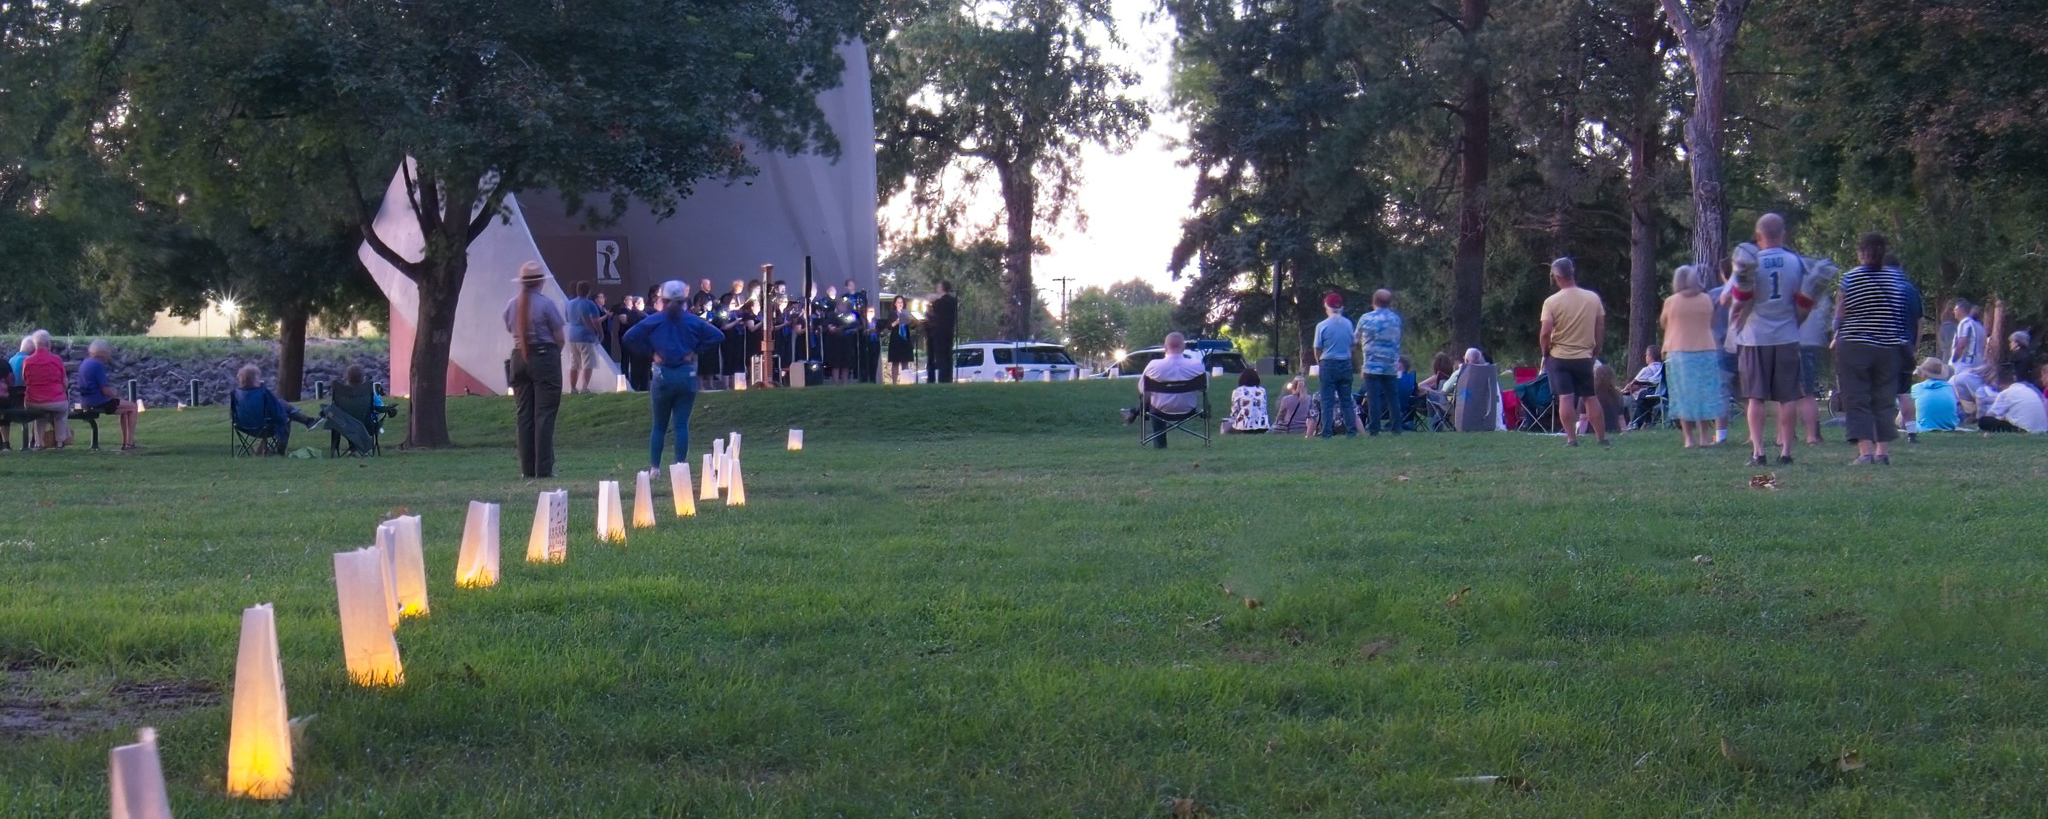 Illuminated paper bags line a grassy field, people gather at the far end in the fading daylight.